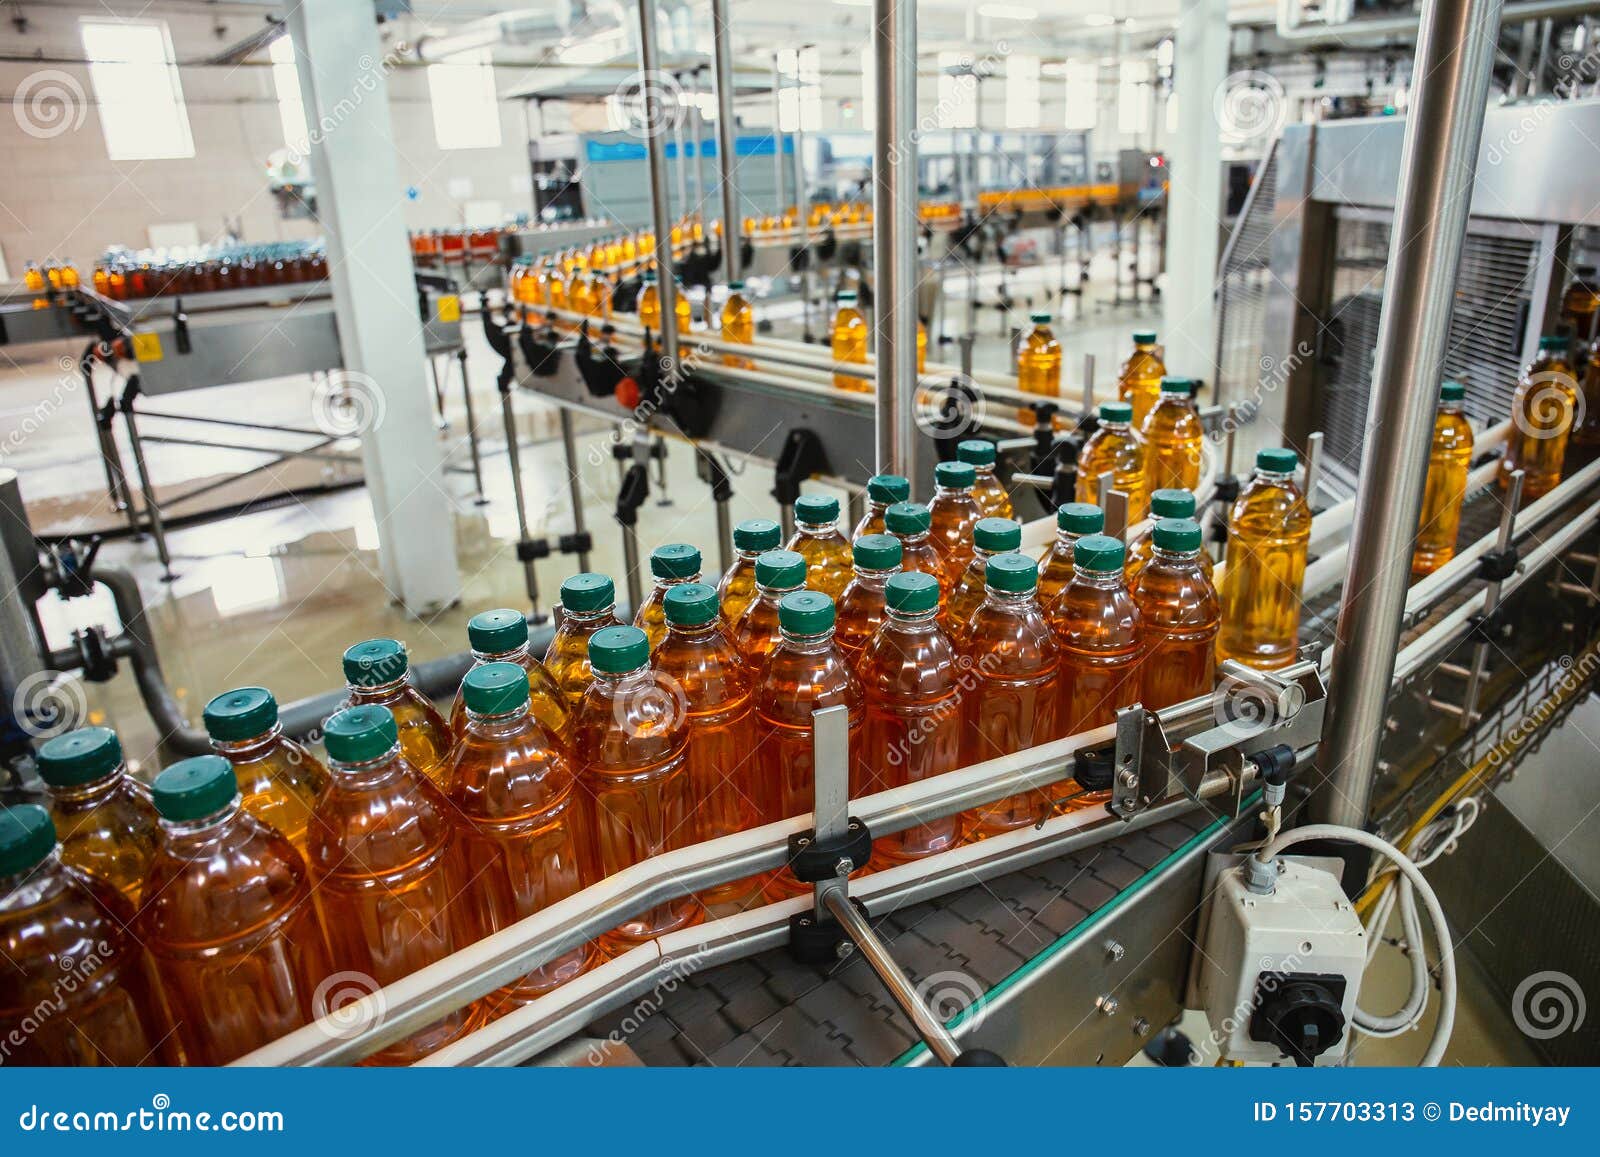 conveyor line with plastic bottles of juice at modern factory equipment. beverage manufacturing plant interior inside